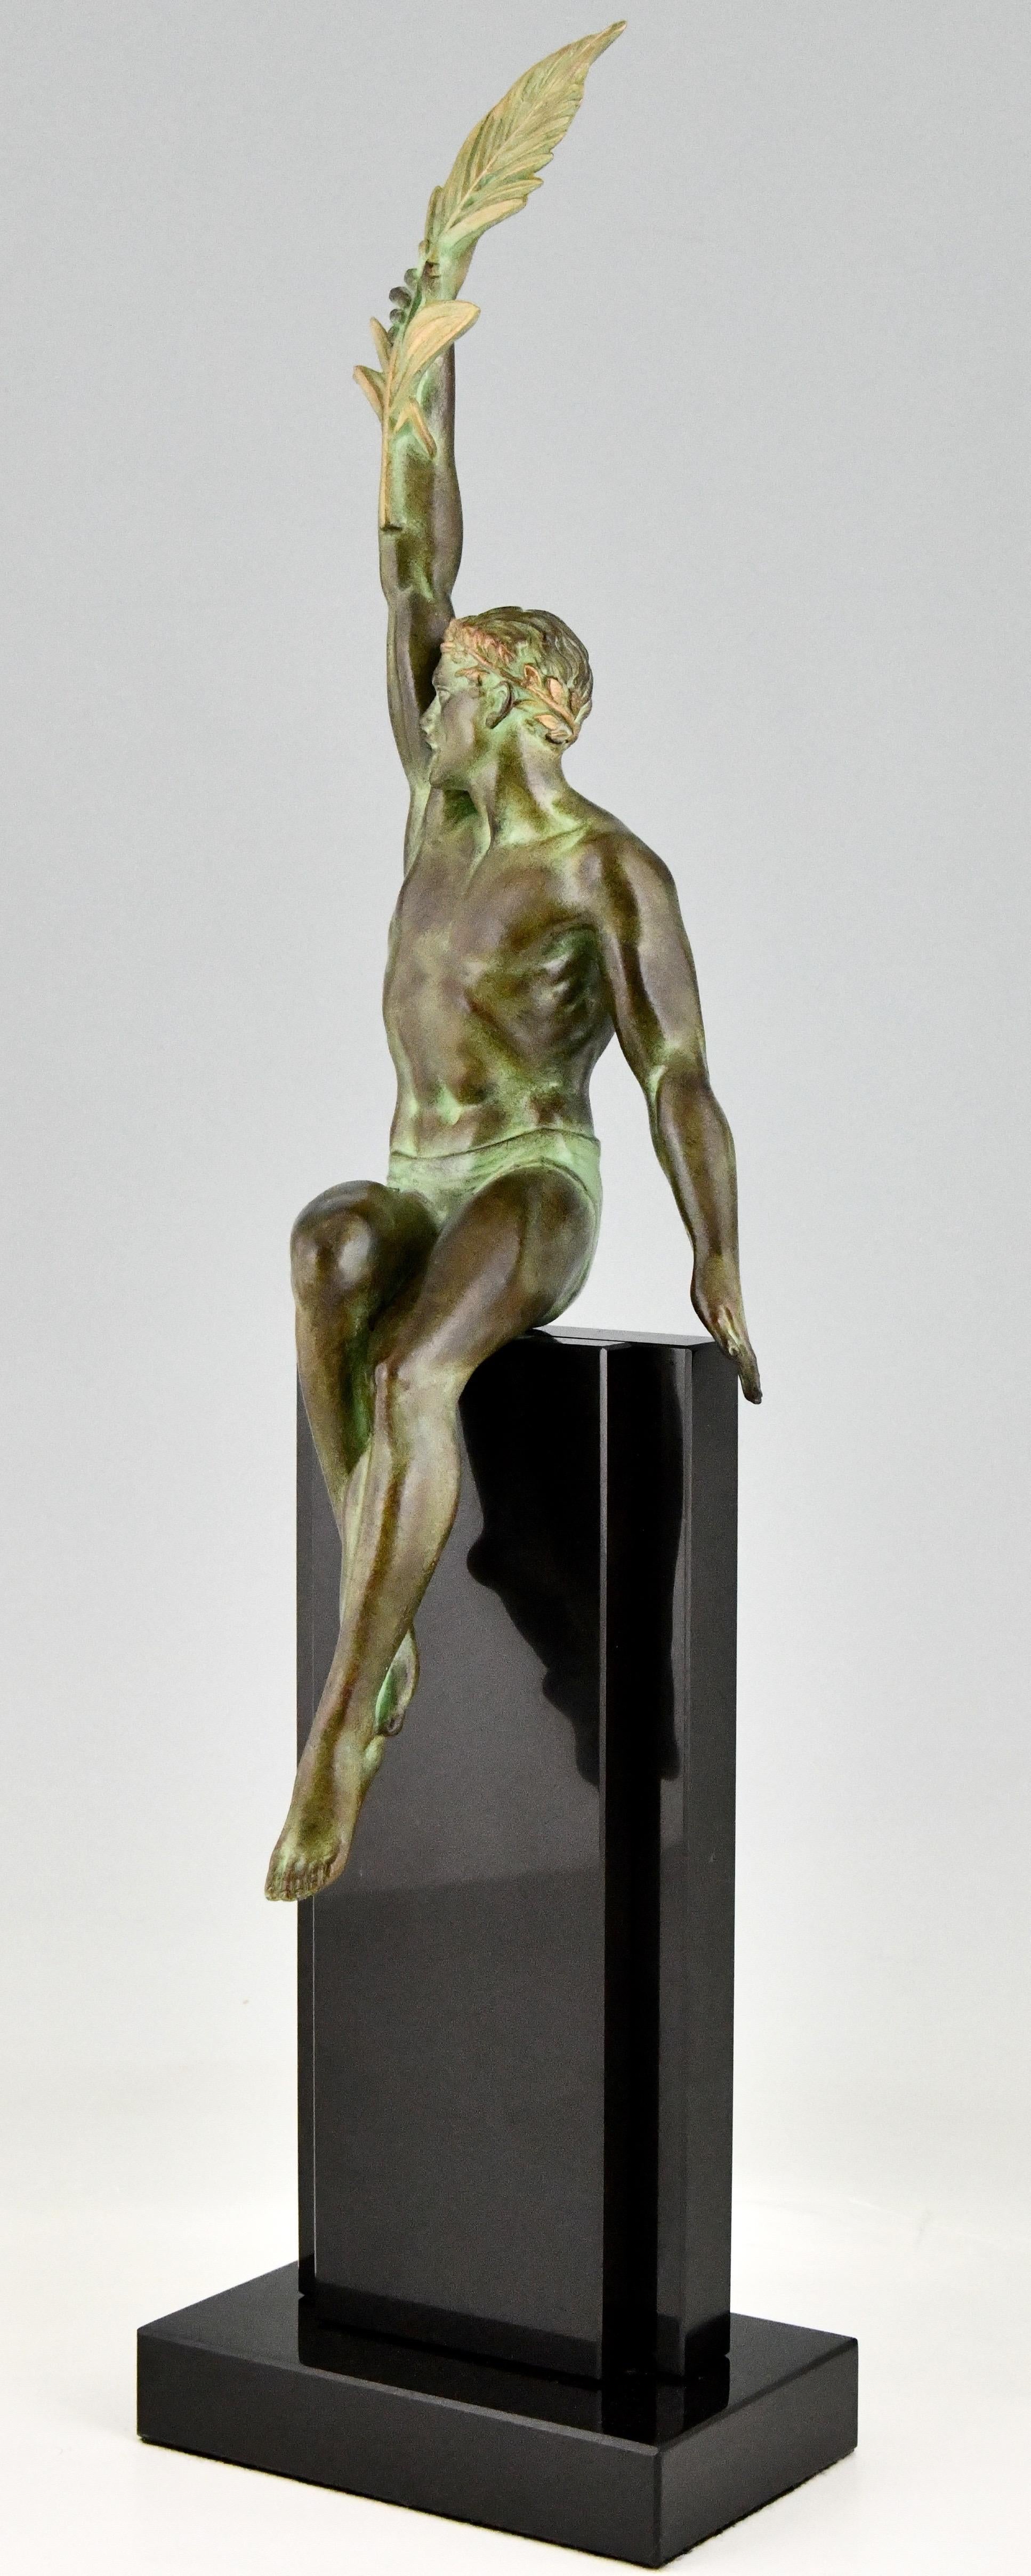 Metal Art Deco Style Sculpture Athlete with Palm Leaf by Max Le Verrier, Victory For Sale